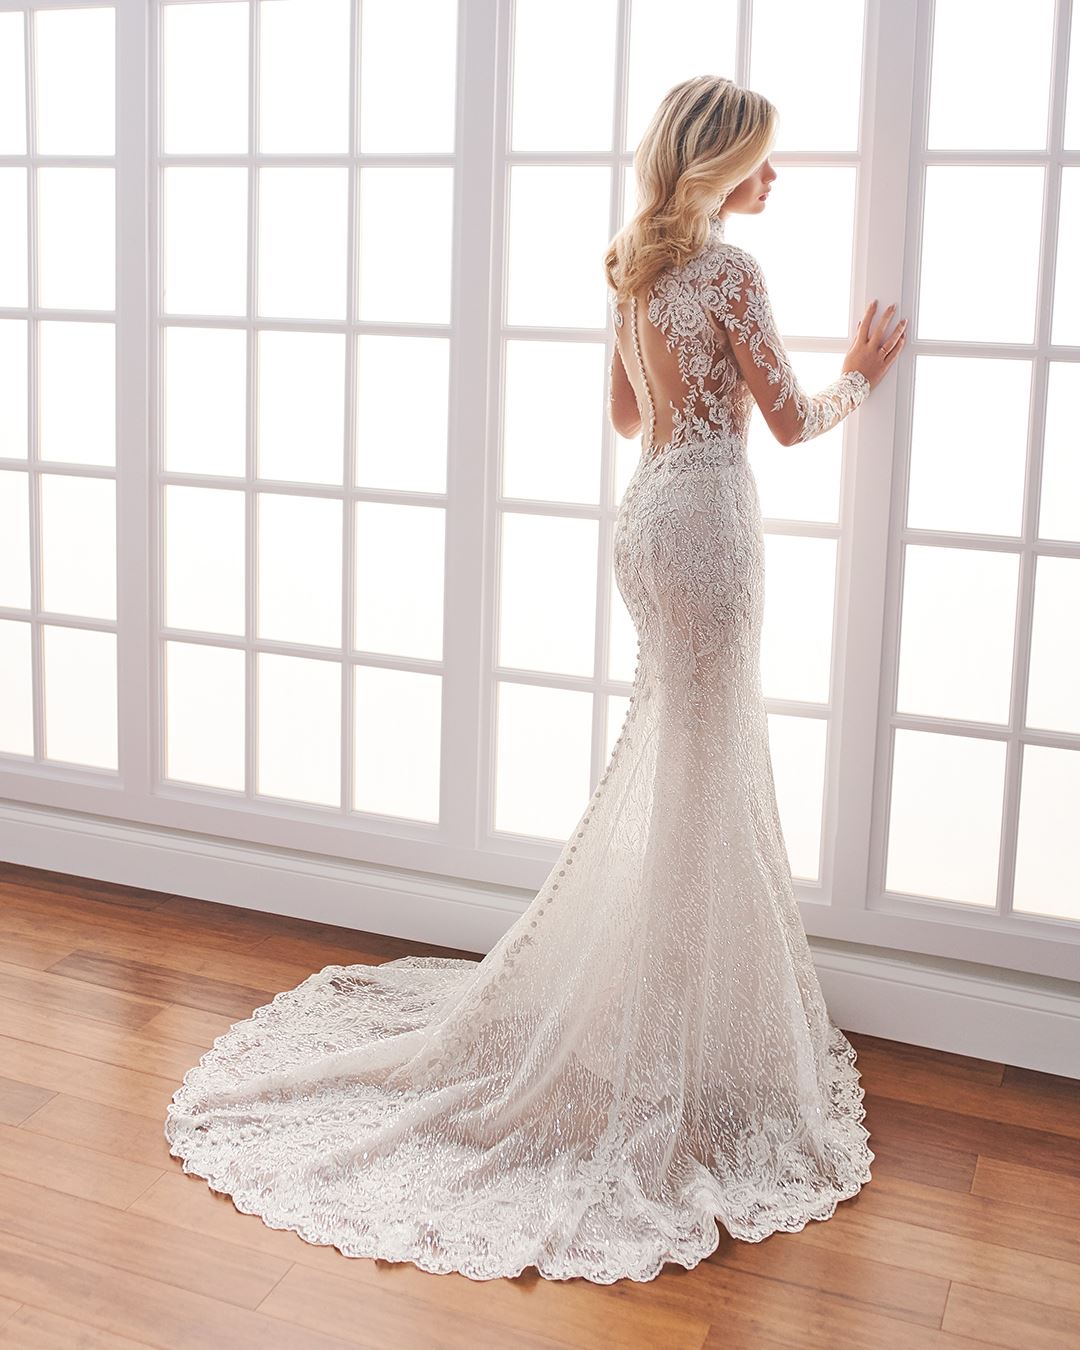 Bride wearing long sleeve wedding dress with sheer lace back